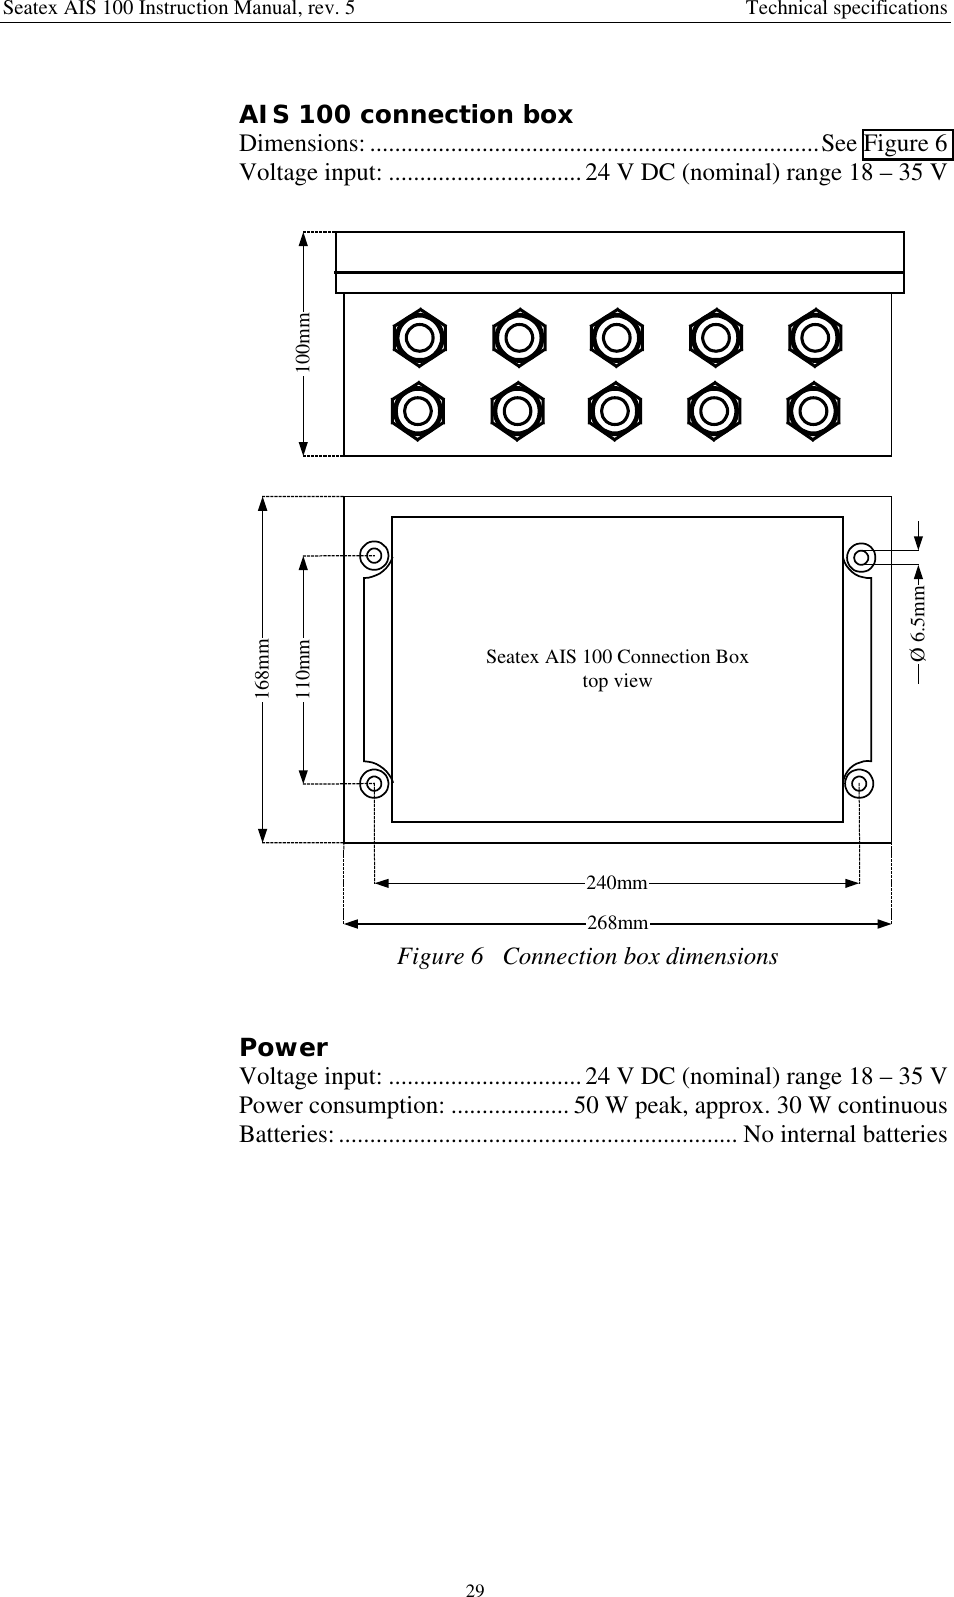 Seatex AIS 100 Instruction Manual, rev. 5 Technical specifications29AIS 100 connection boxDimensions: ........................................................................See Figure 6Voltage input: ............................... 24 V DC (nominal) range 18 – 35 VSeatex AIS 100 Connection Boxtop view168mm268mm110mm240mmØ 6.5mm100mmFigure 6   Connection box dimensionsPowerVoltage input: ............................... 24 V DC (nominal) range 18 – 35 VPower consumption: ................... 50 W peak, approx. 30 W continuousBatteries:................................................................ No internal batteries